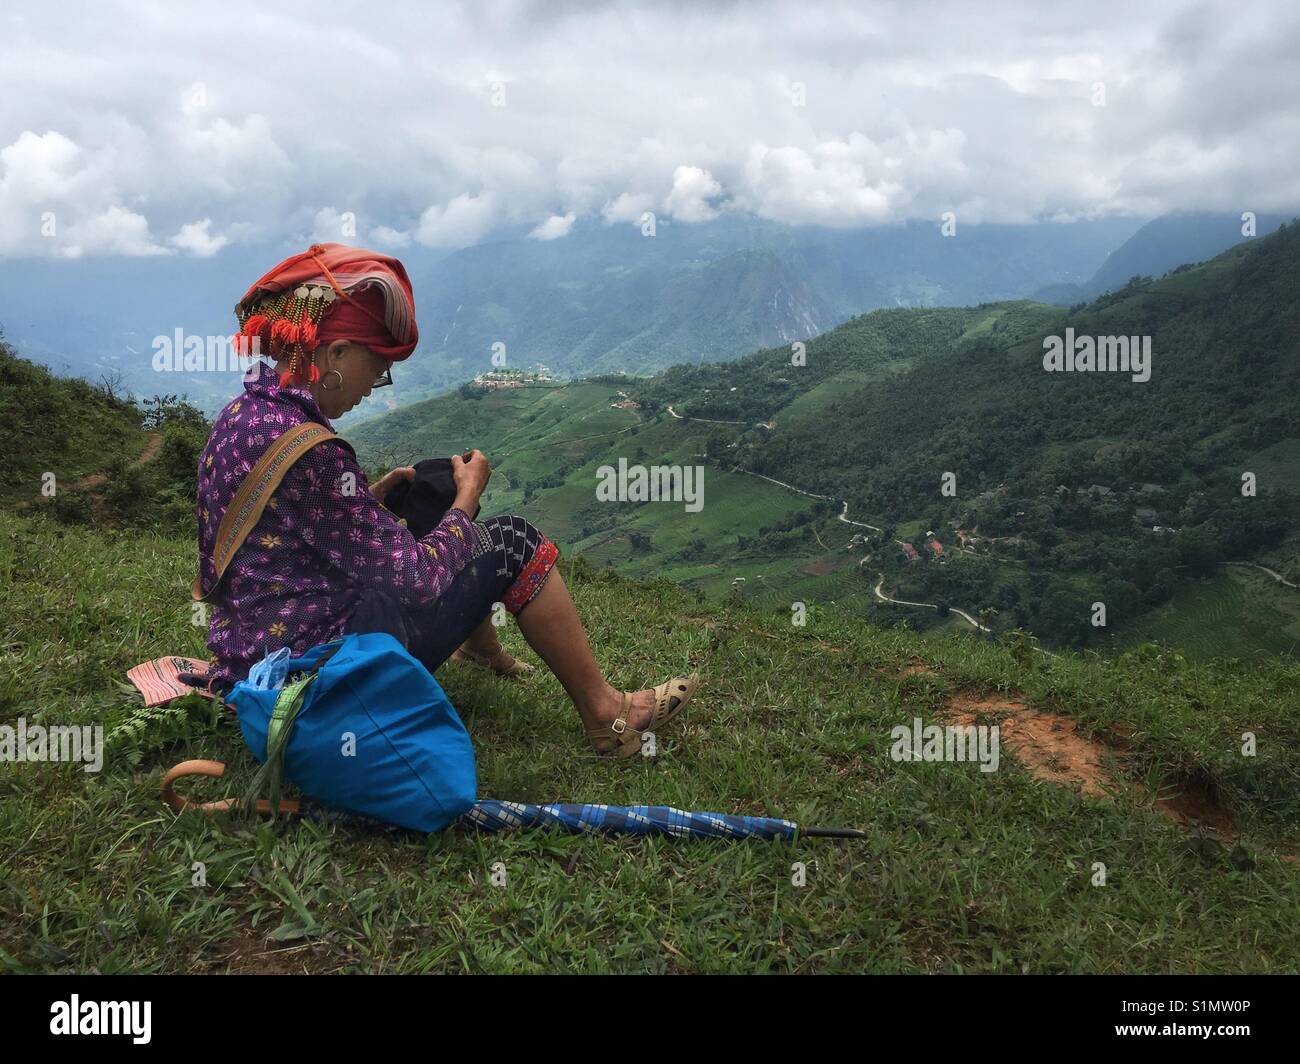 A lady from the Red Dao minority tribe in Northern Vietnam sits doing her embroidery on a mountain top Stock Photo